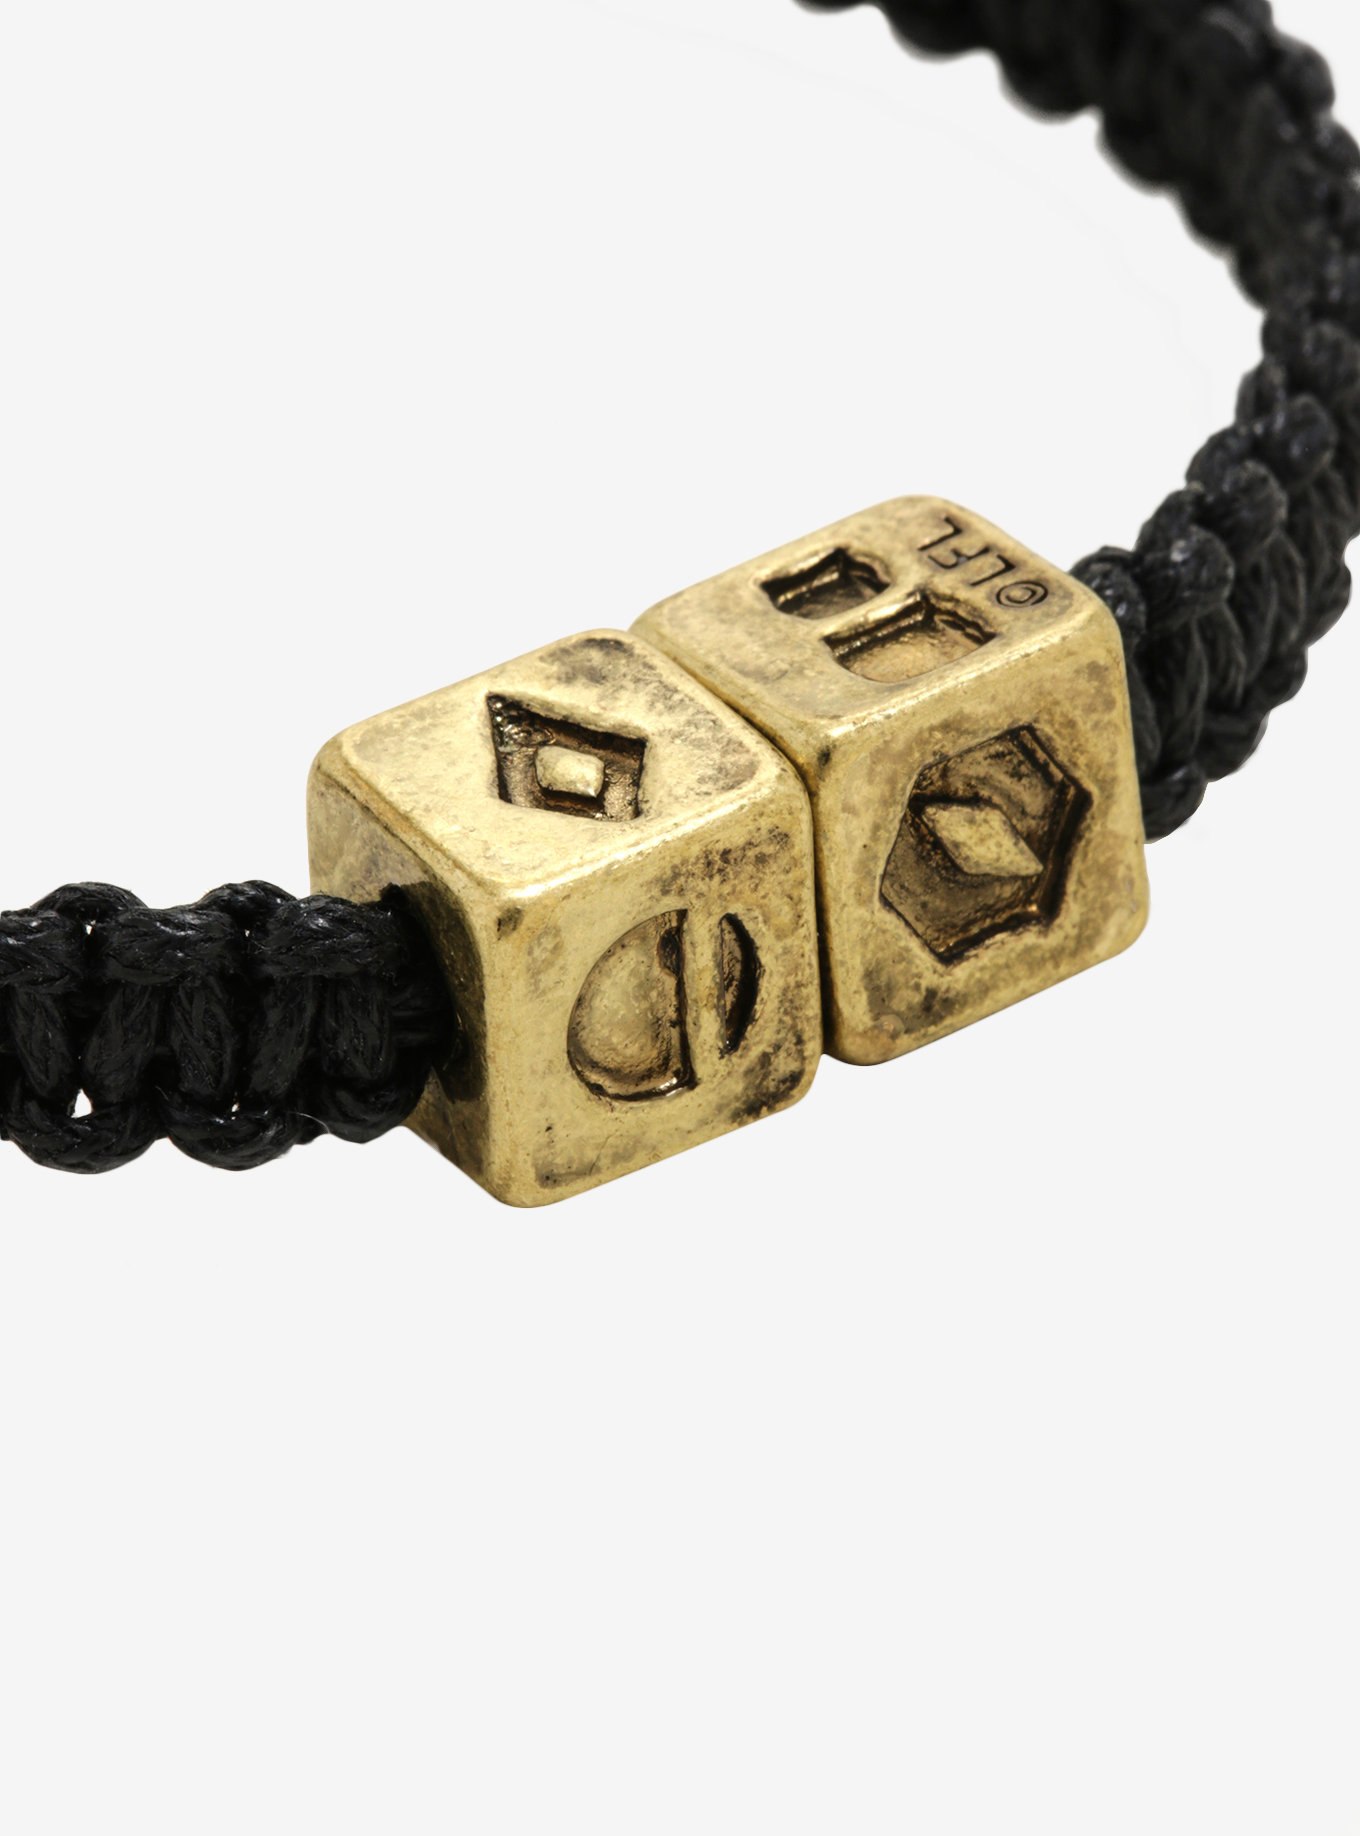 Solo A Star Wars Story Han Solo Dice Cord Bracelet at Box Lunch